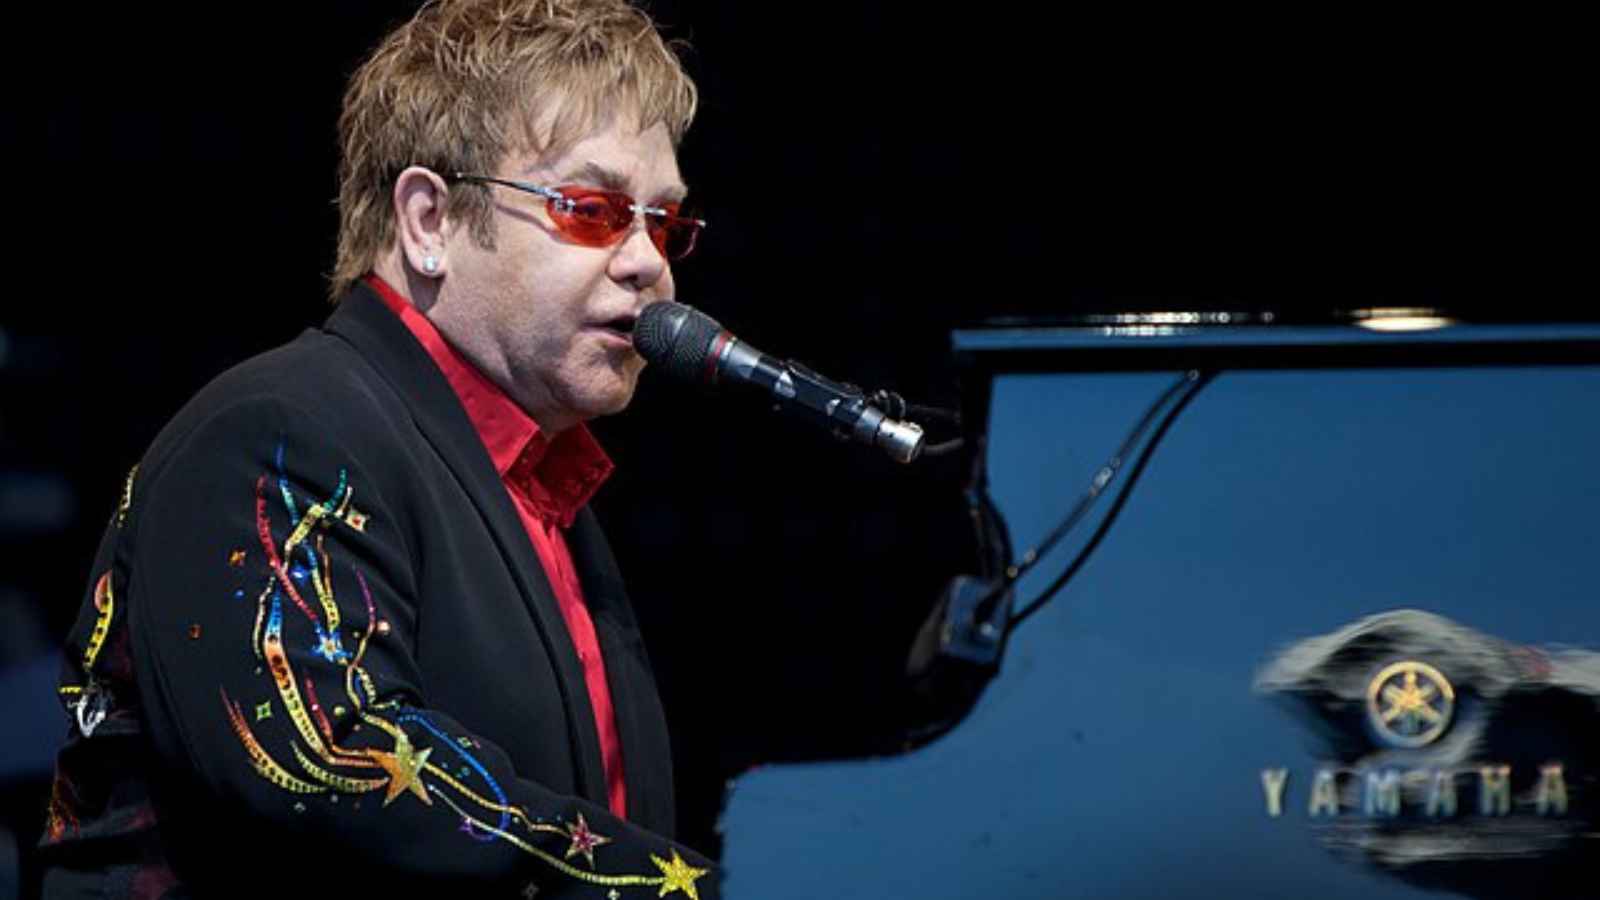 <p>Elton John’s “Your Song” is a timeless masterpiece that has captured the hearts of many. It’s no wonder that it has become a go-to love song for couples around the world.</p><p>But what makes this song truly unforgettable is Elton John’s soulful vocals and the beautiful melody that accompanies it. The harmonious piano playing adds another layer of emotion, making it impossible not to feel moved by the song. It’s no wonder that “Your Song” has stood the test of time and continues to be a beloved classic.</p>